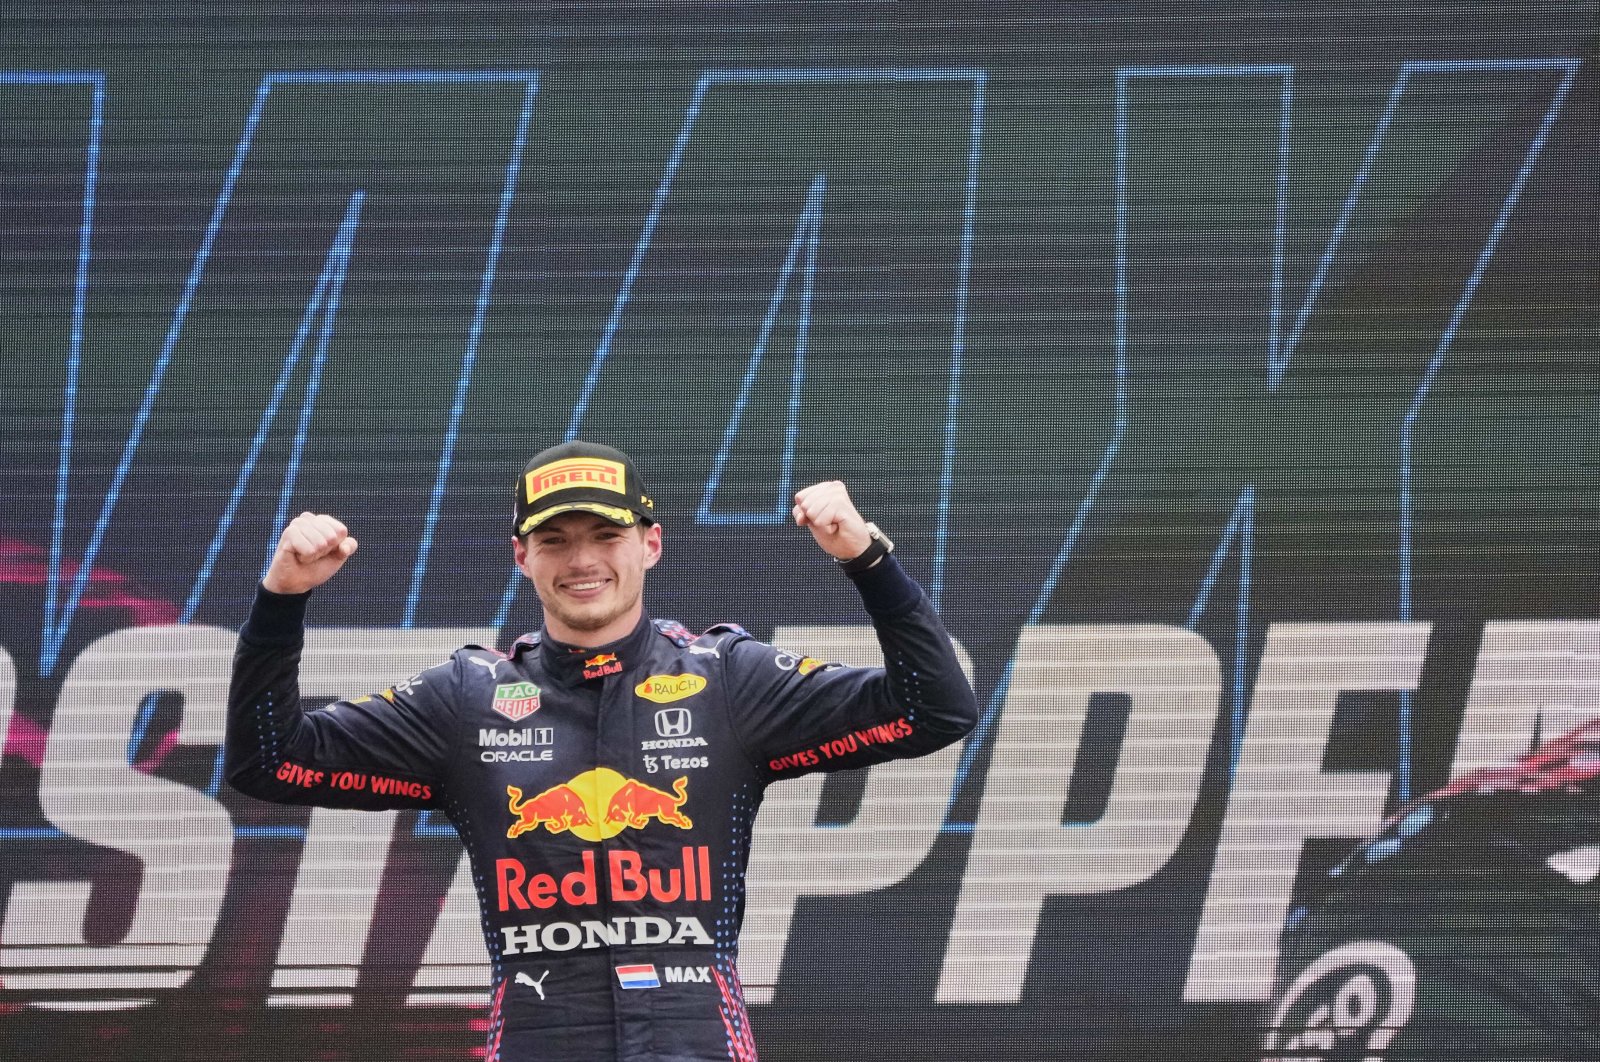 Red Bull driver Max Verstappen of the Netherlands celebrates from the podium after winning during the French Formula One Grand Prix at the Paul Ricard racetrack in Le Castellet, southern France, Sunday, June 20, 2021. (AP Photo/Francois Mori)